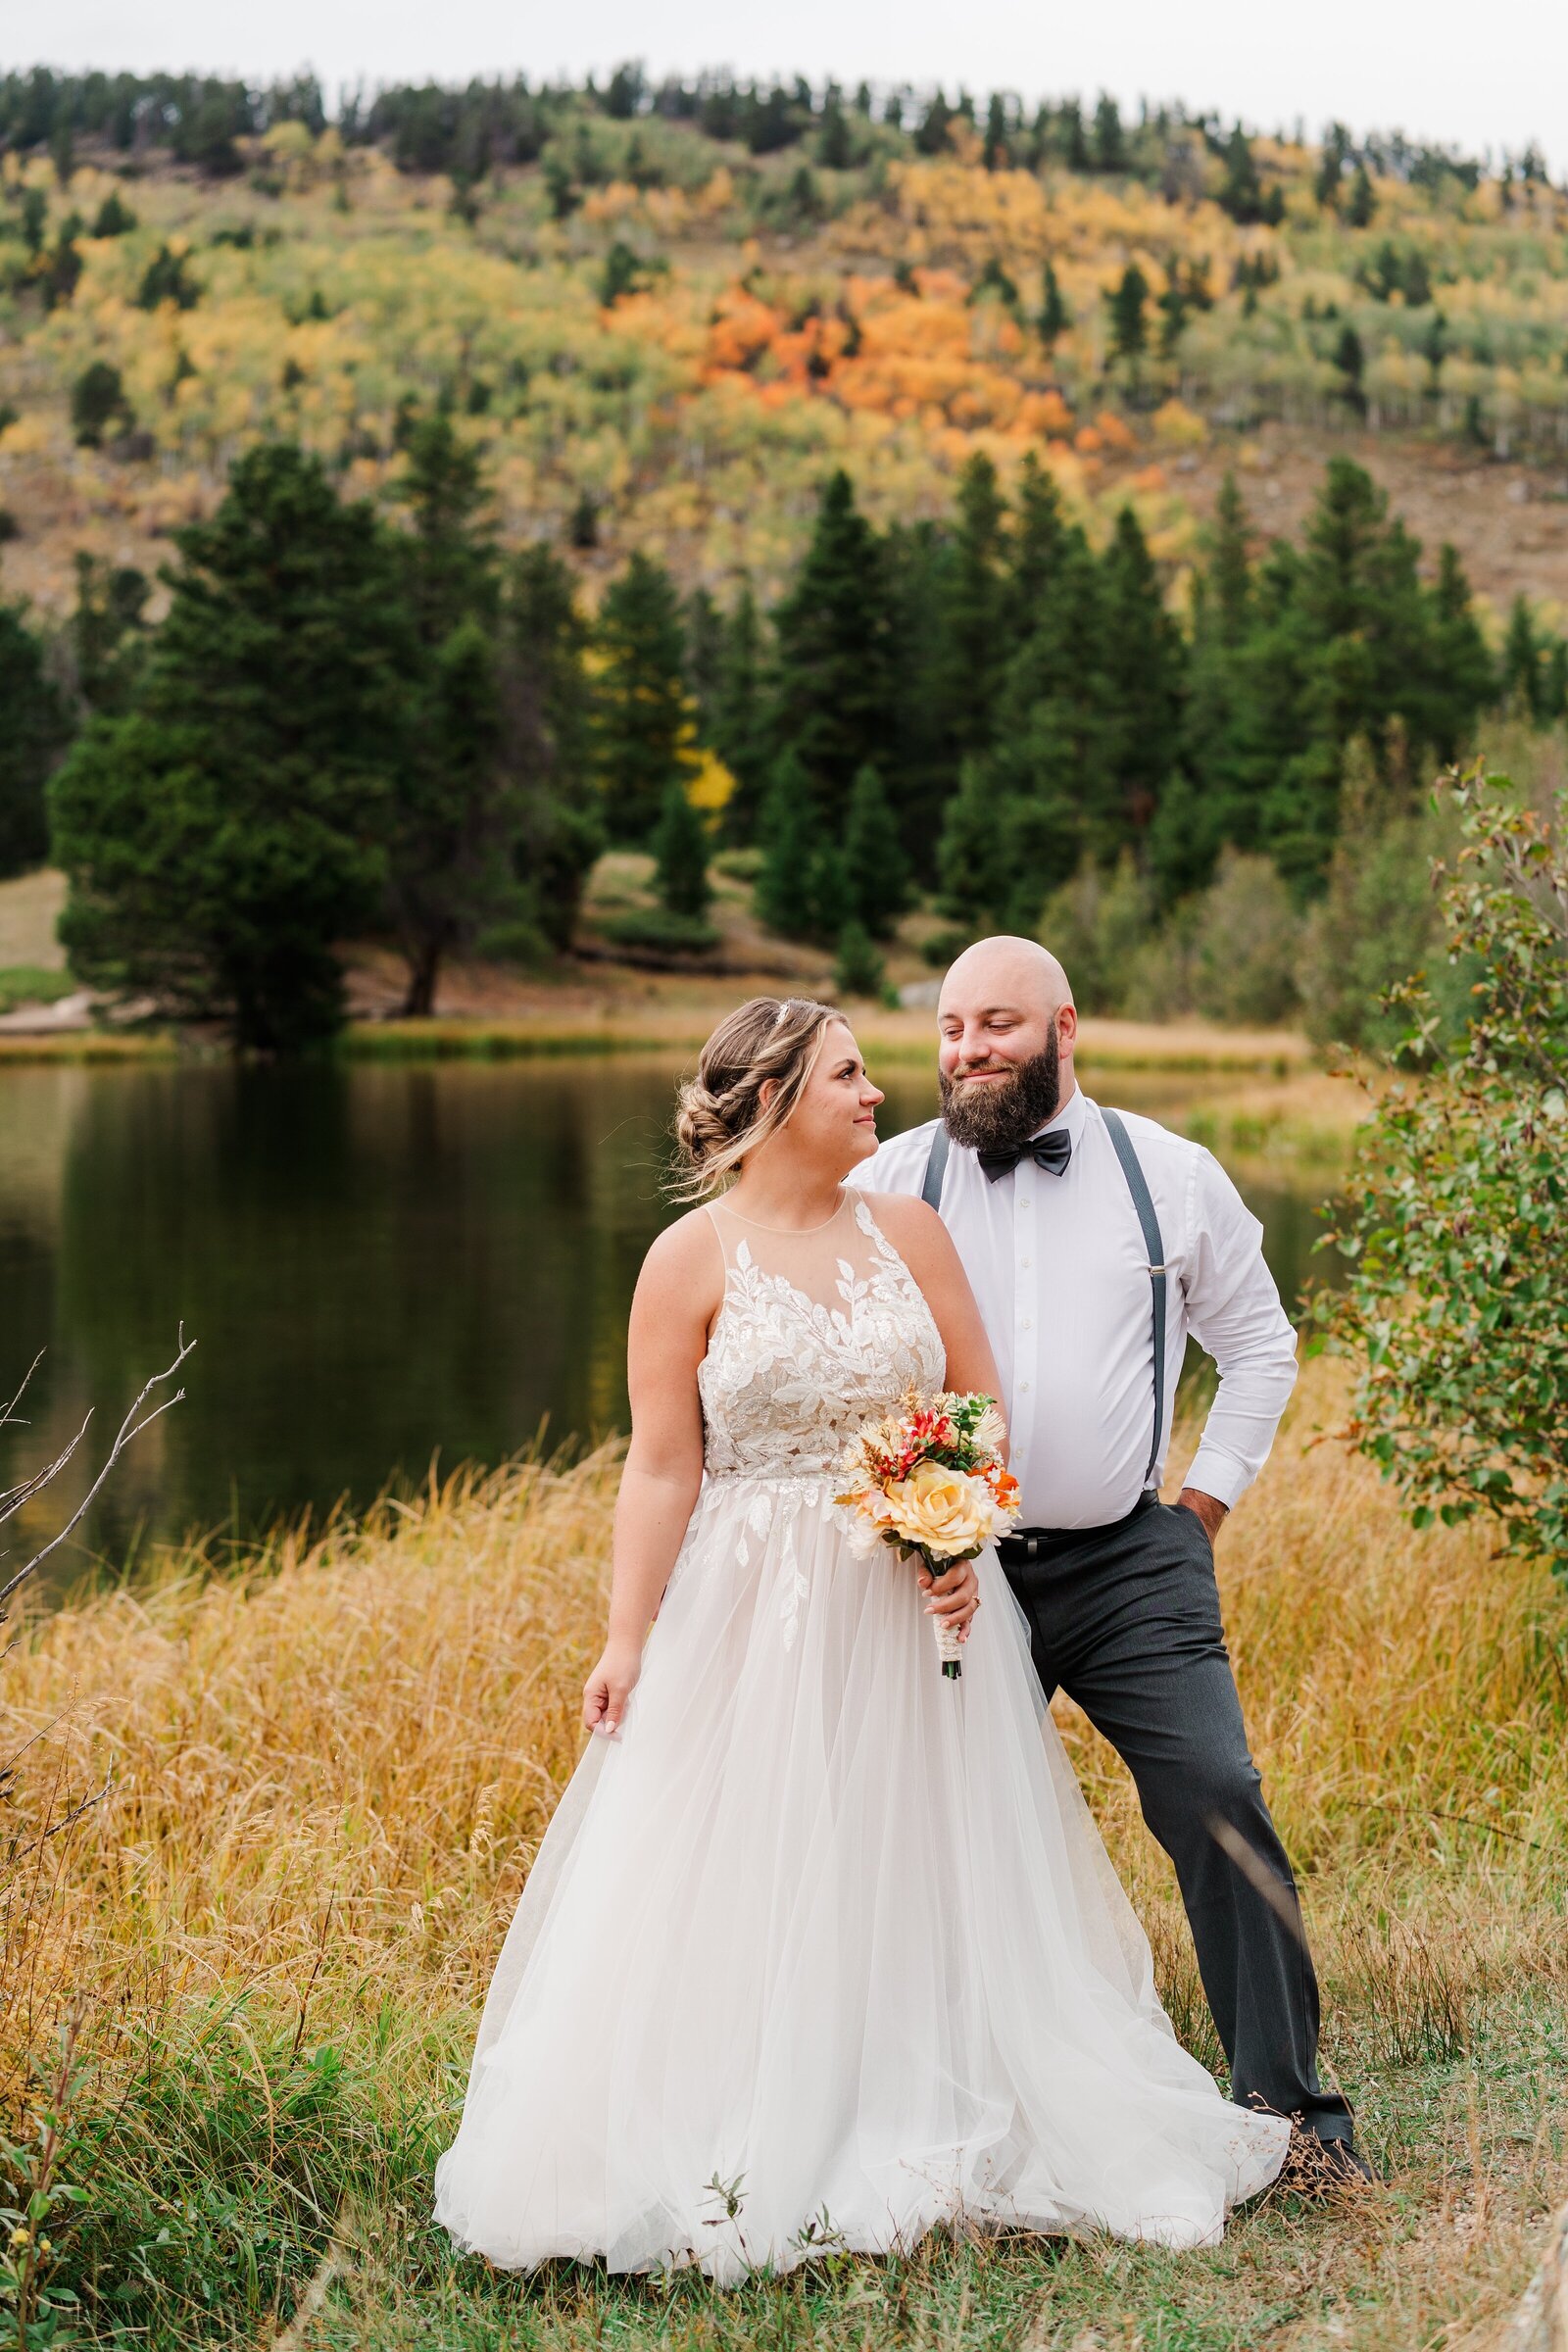 Experience the beauty of natural light with Samantha Immer Photography, your natural light wedding photographer in Colorado. Let's capture your love story in a way that is warm, inviting, and filled with natural beauty.